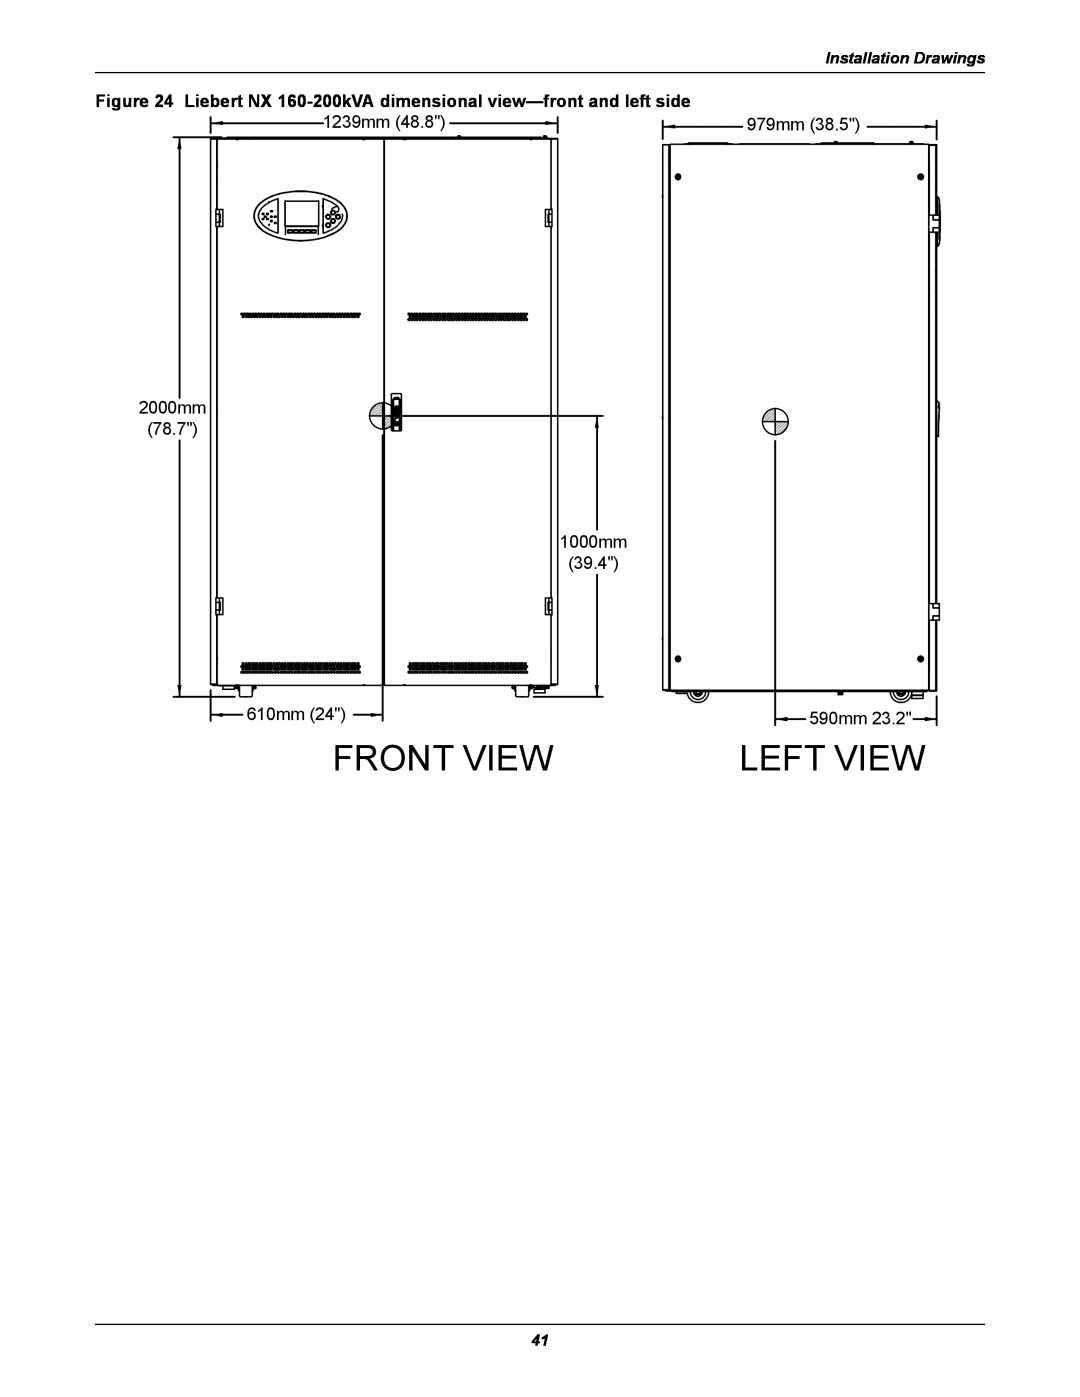 Emerson 480V, 60HZ Front View, Left View, 1239mm, 2000mm, 78.7, 1000mm, 39.4, 610mm, 979mm 590mm, Installation Drawings 